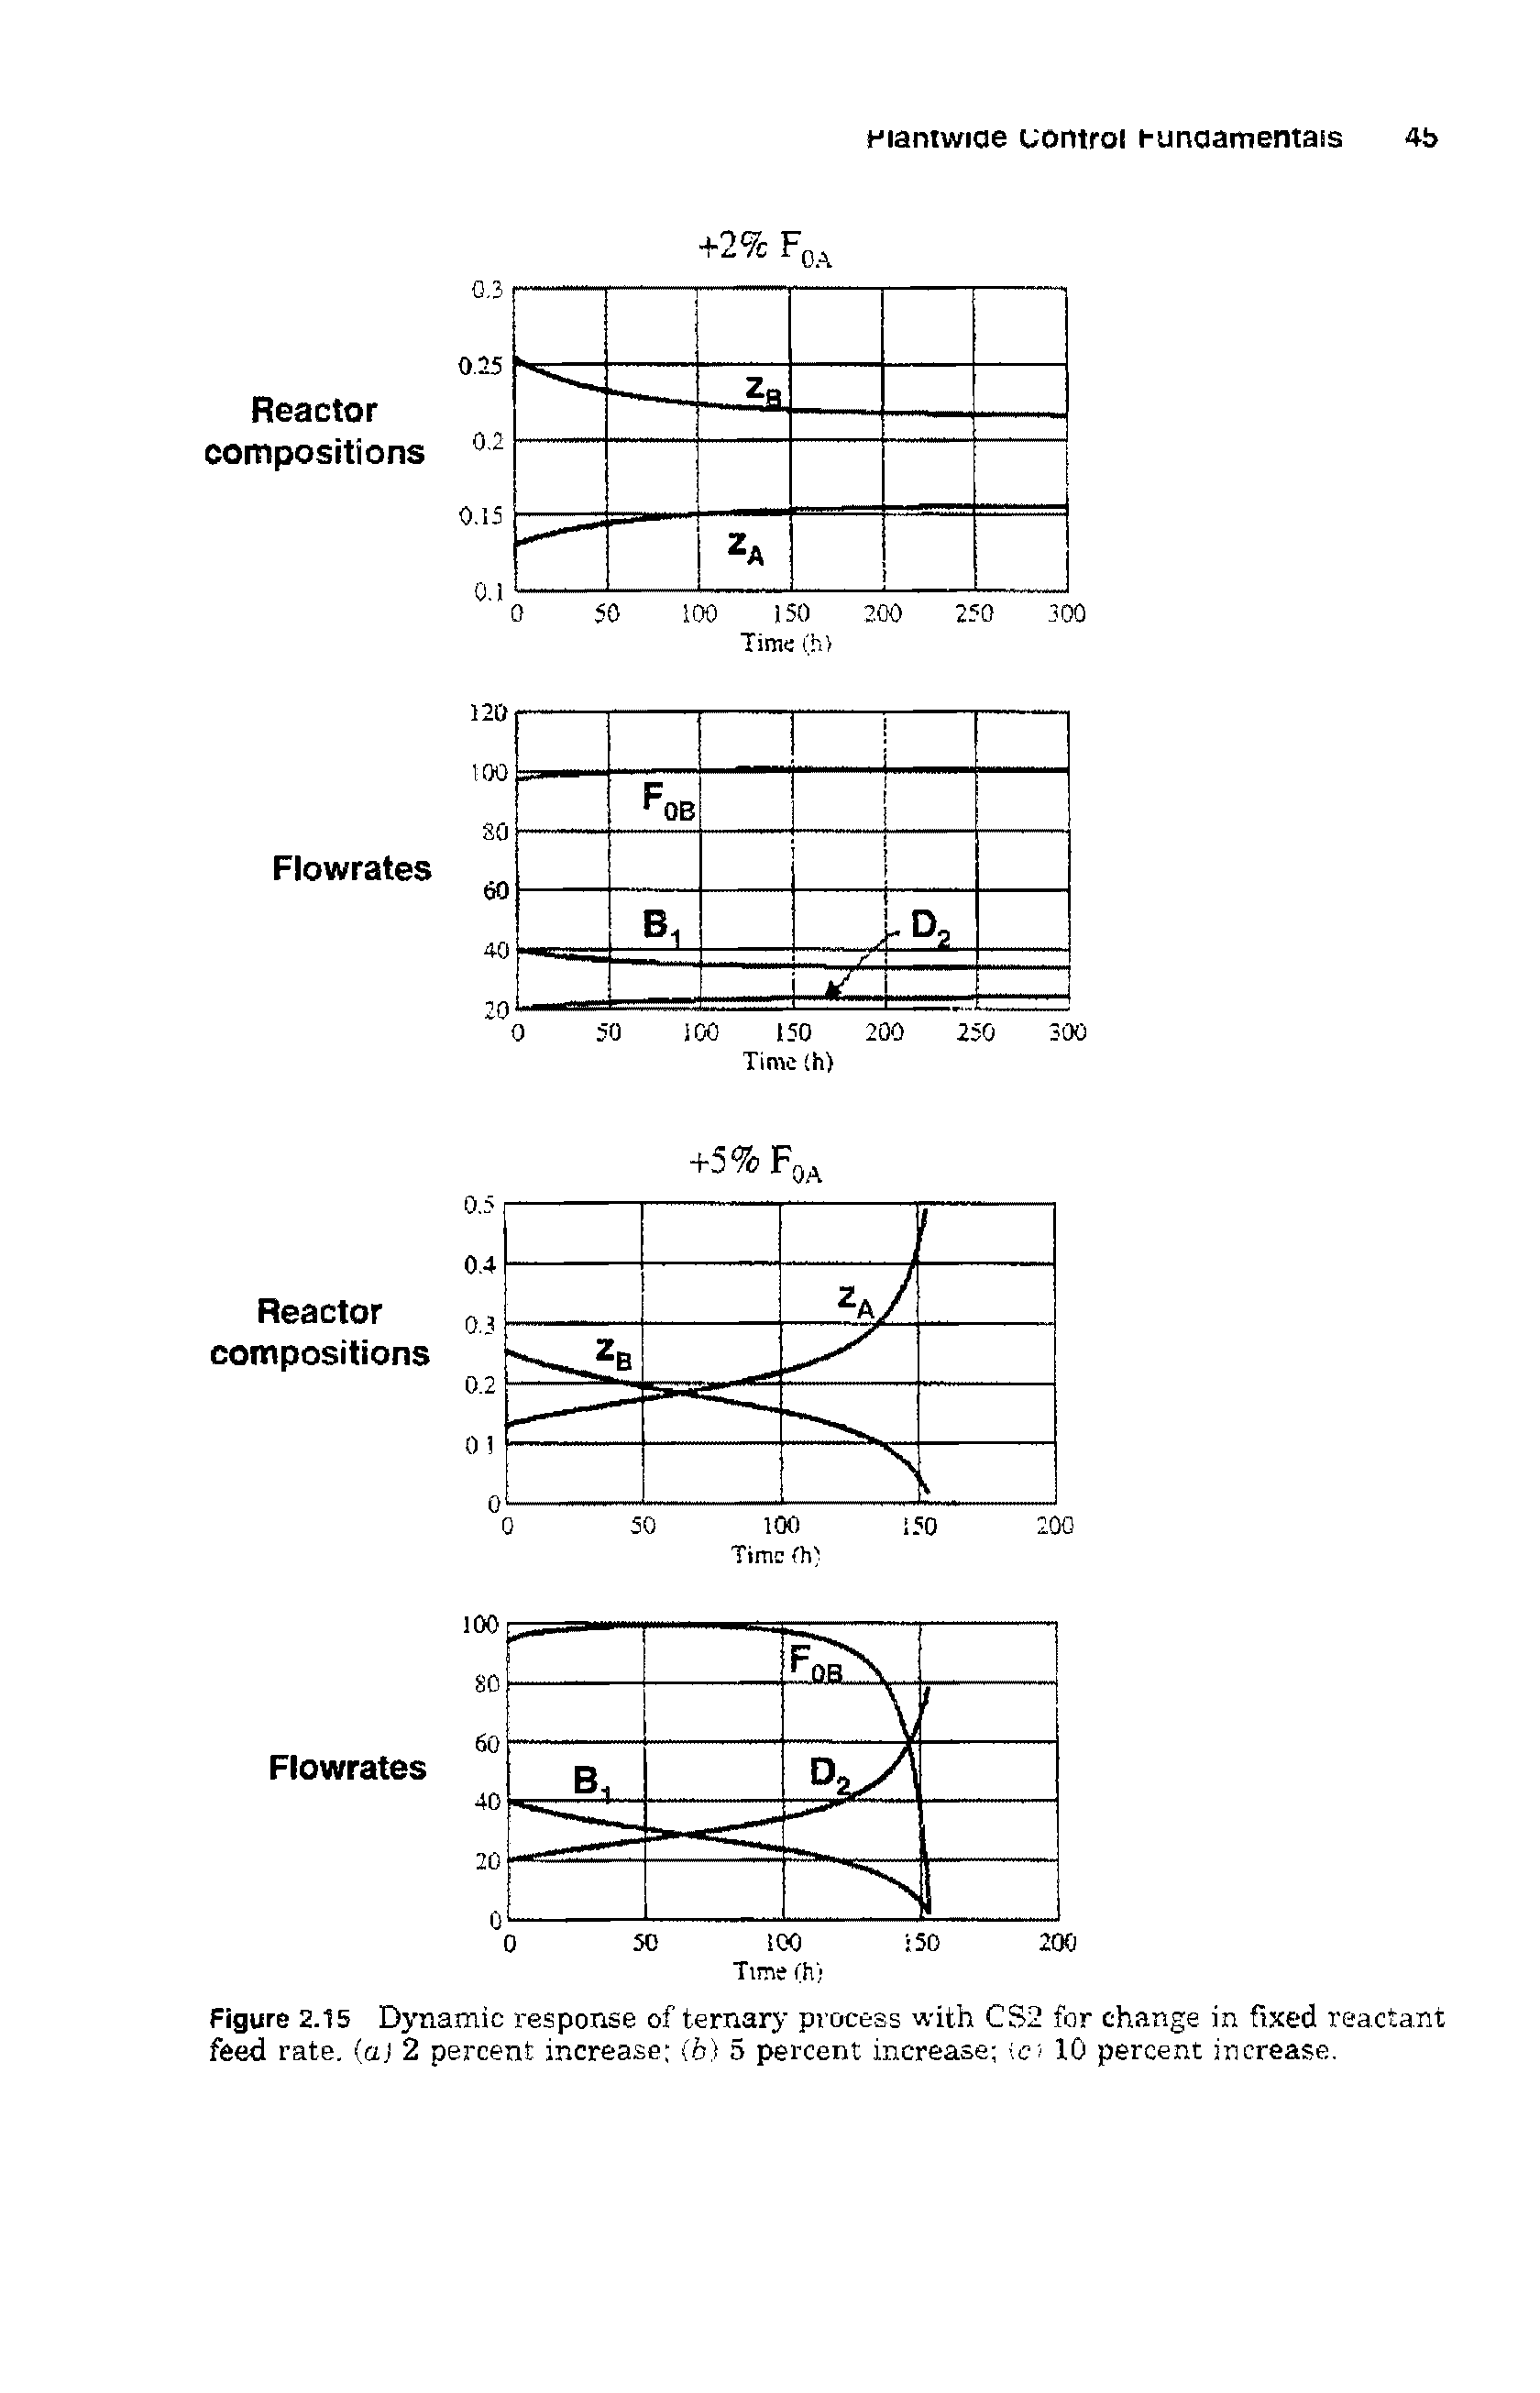 Figure 2.15 Dynamic response of ternary process with CS2 for change in fixed reactant feed rate, (a 2 percent increase (b) 5 percent increase o 10 percent increase.